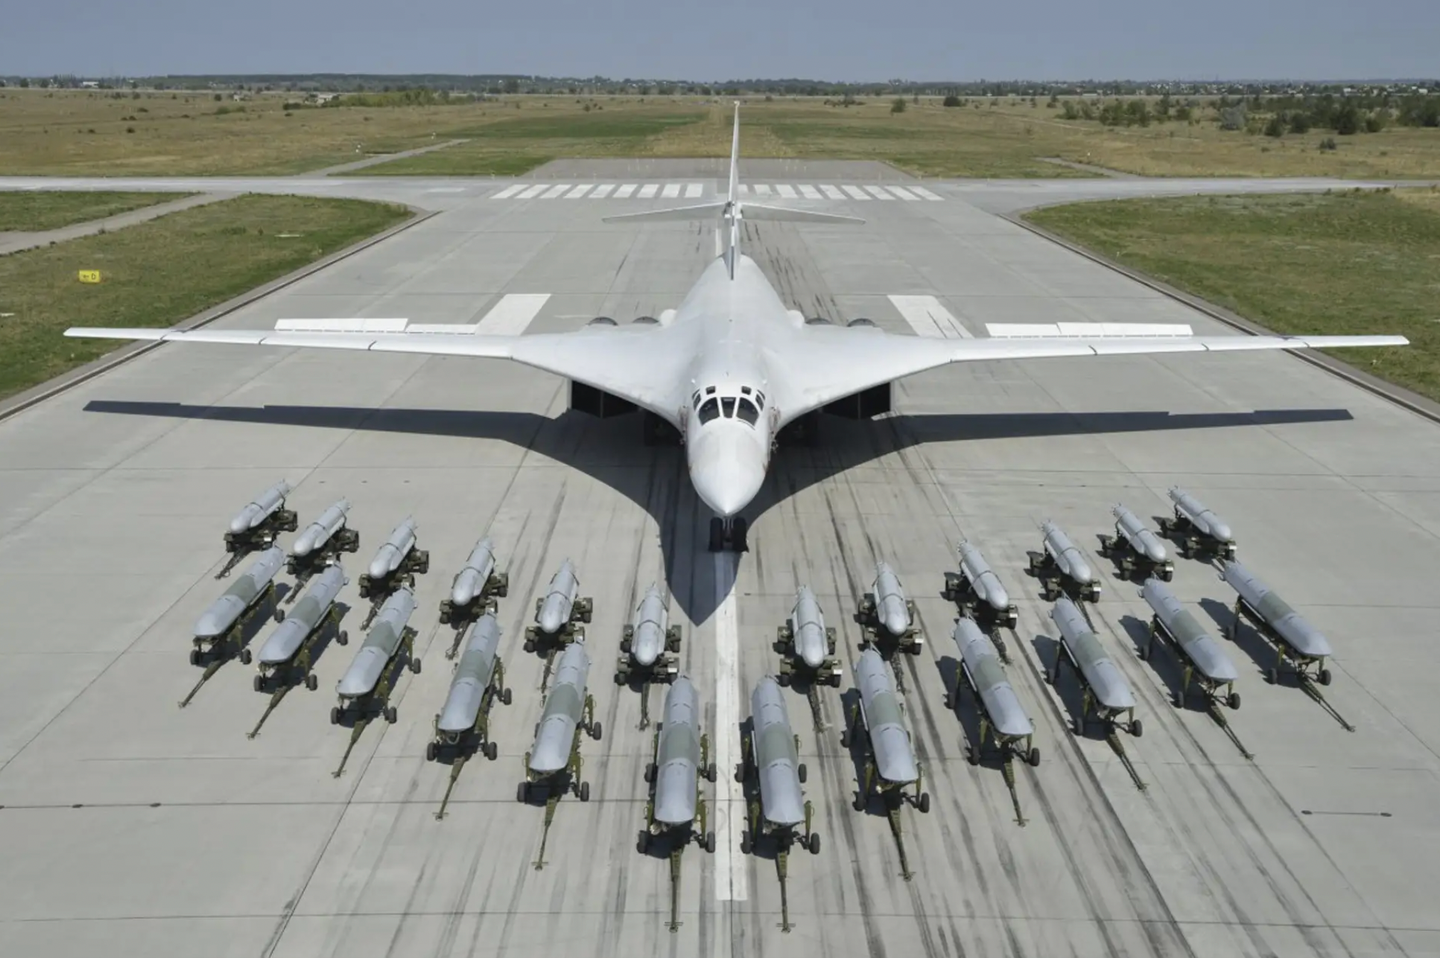 A row of 12 Kh-101/102-series air-launched cruise missiles, in front, and another dozen of the earlier Kh-55-series missiles behind them, on display with a Tu-160 Blackjack bomber in the background.&nbsp;<em>Russian Ministry of Defense</em>